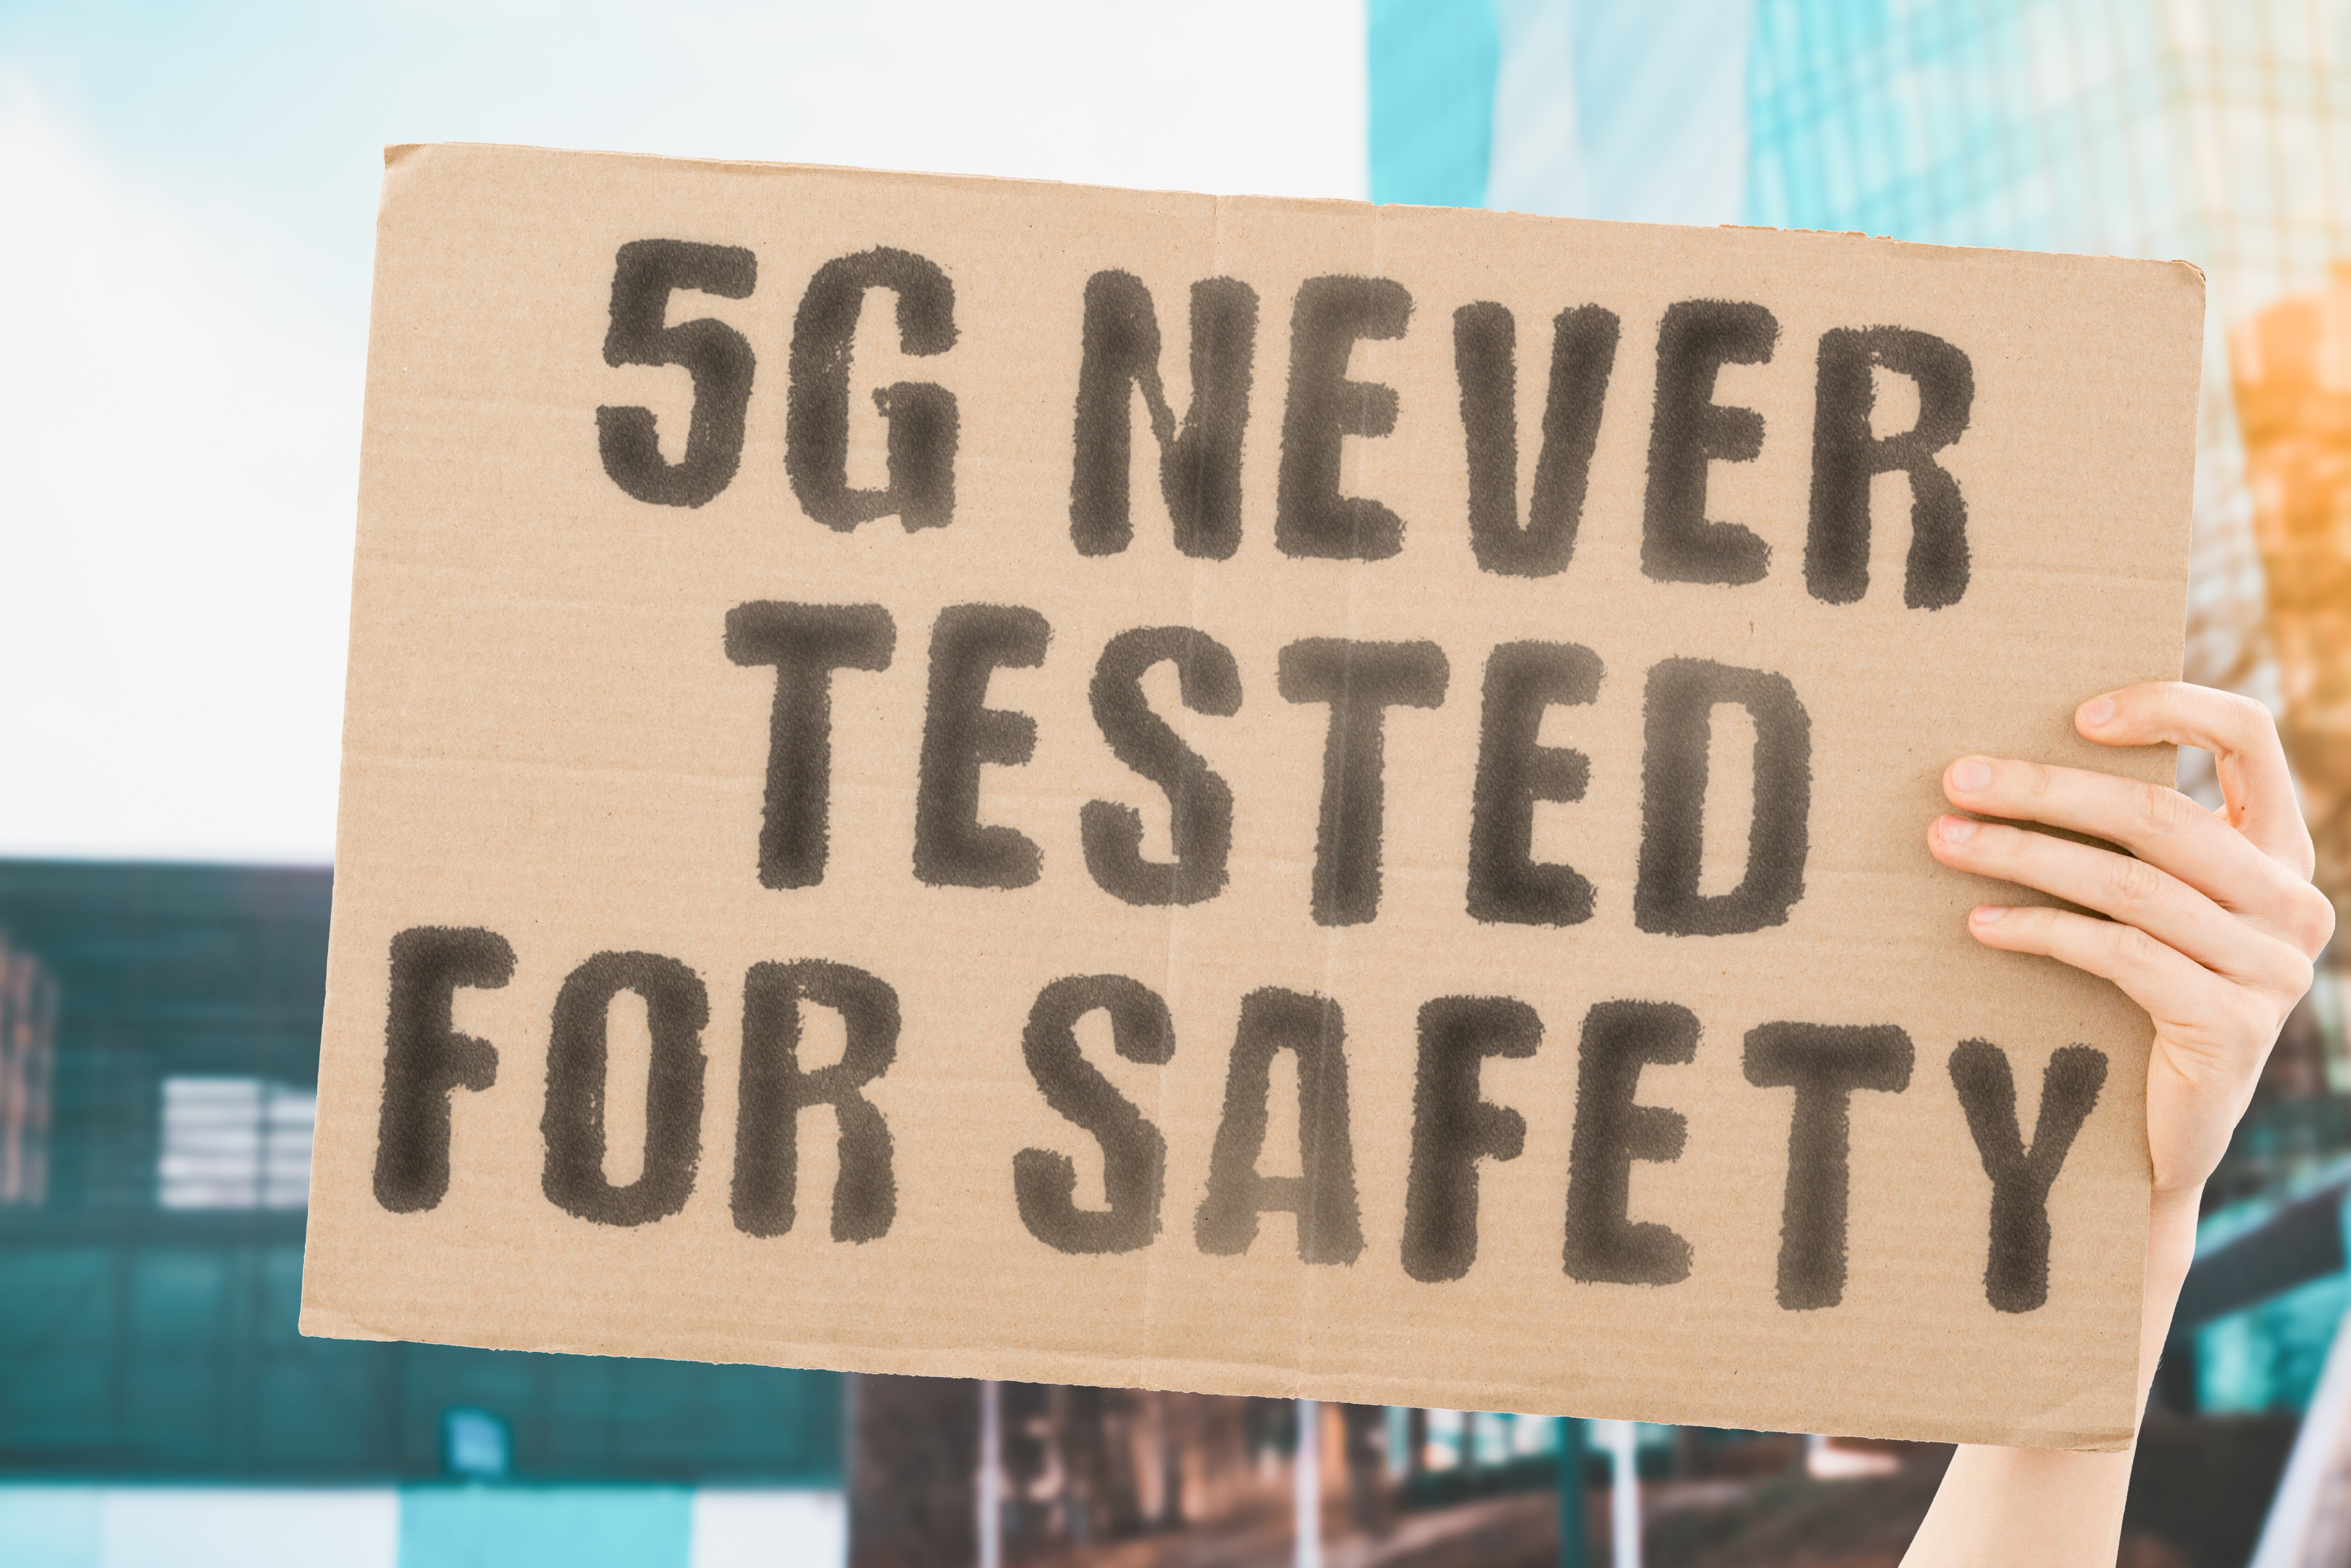 "5G never tested for safety"